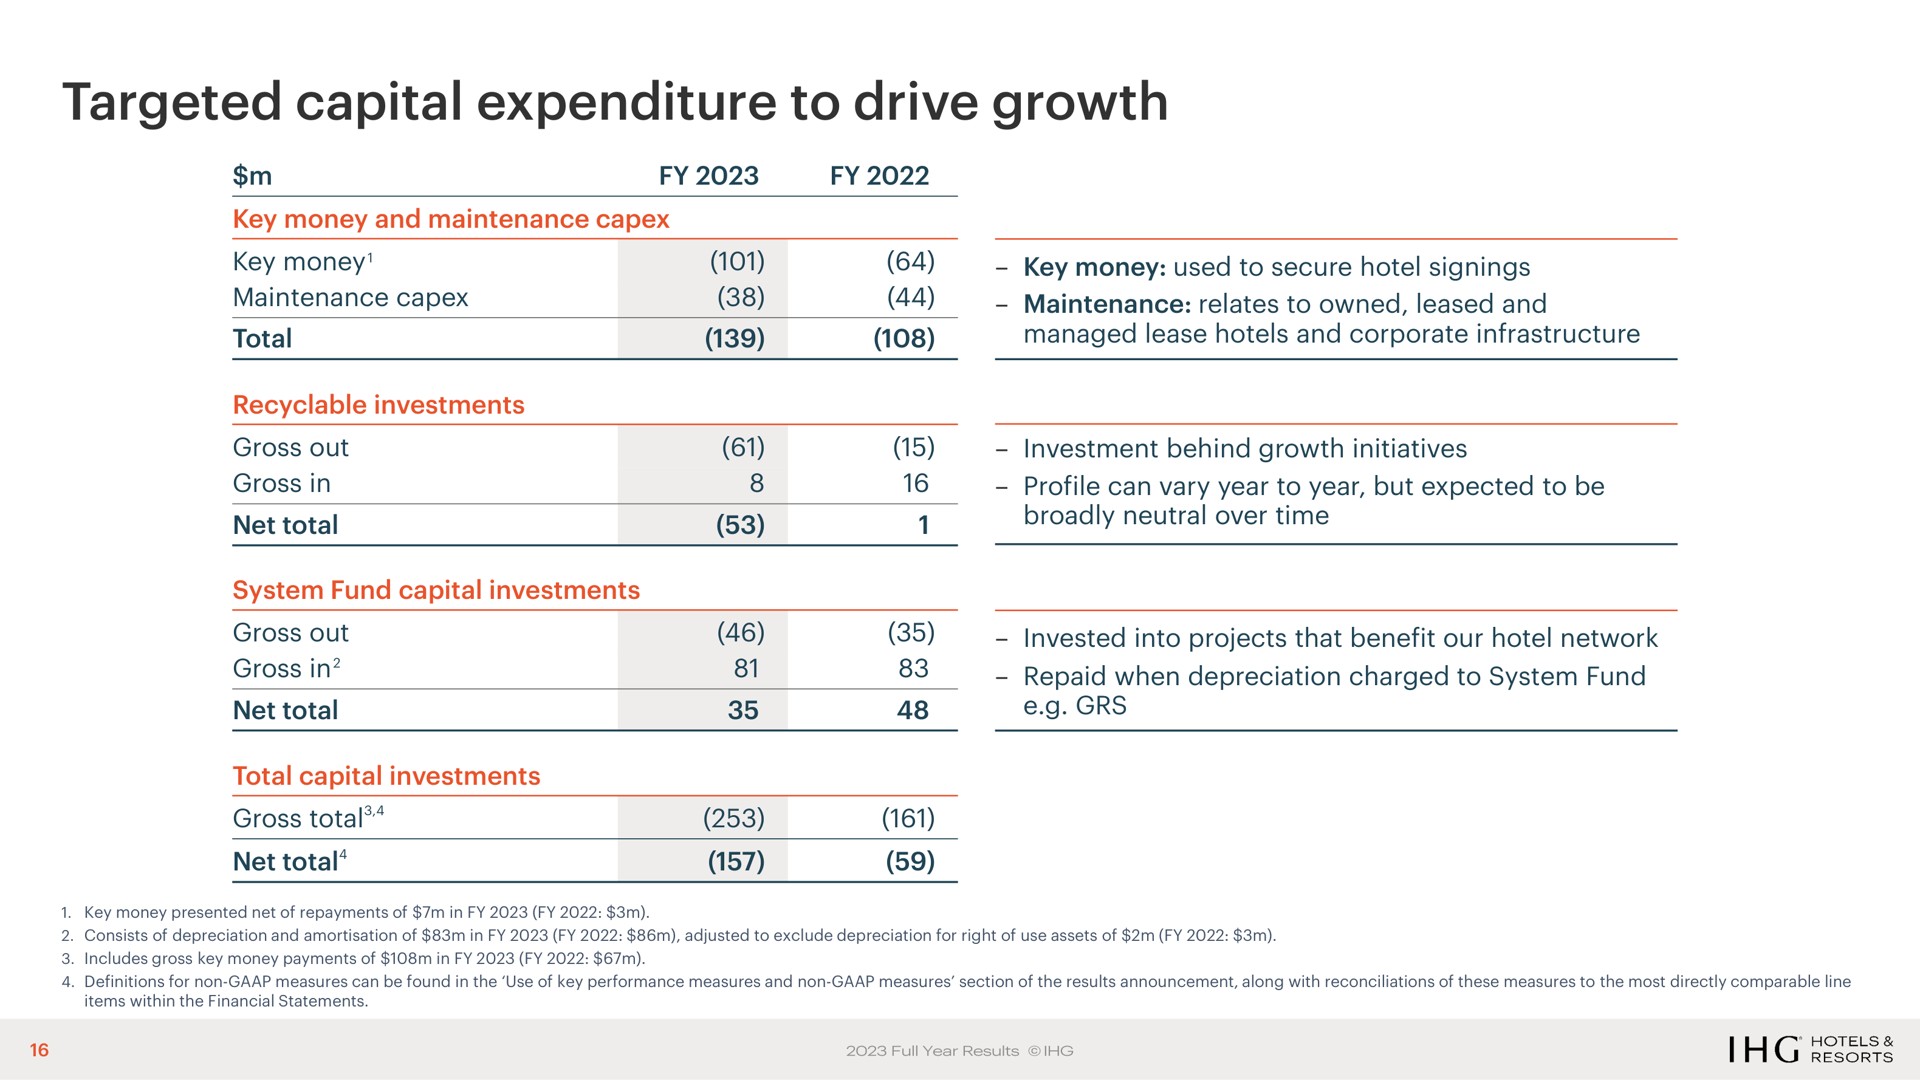 targeted capital expenditure to drive growth | IHG Hotels